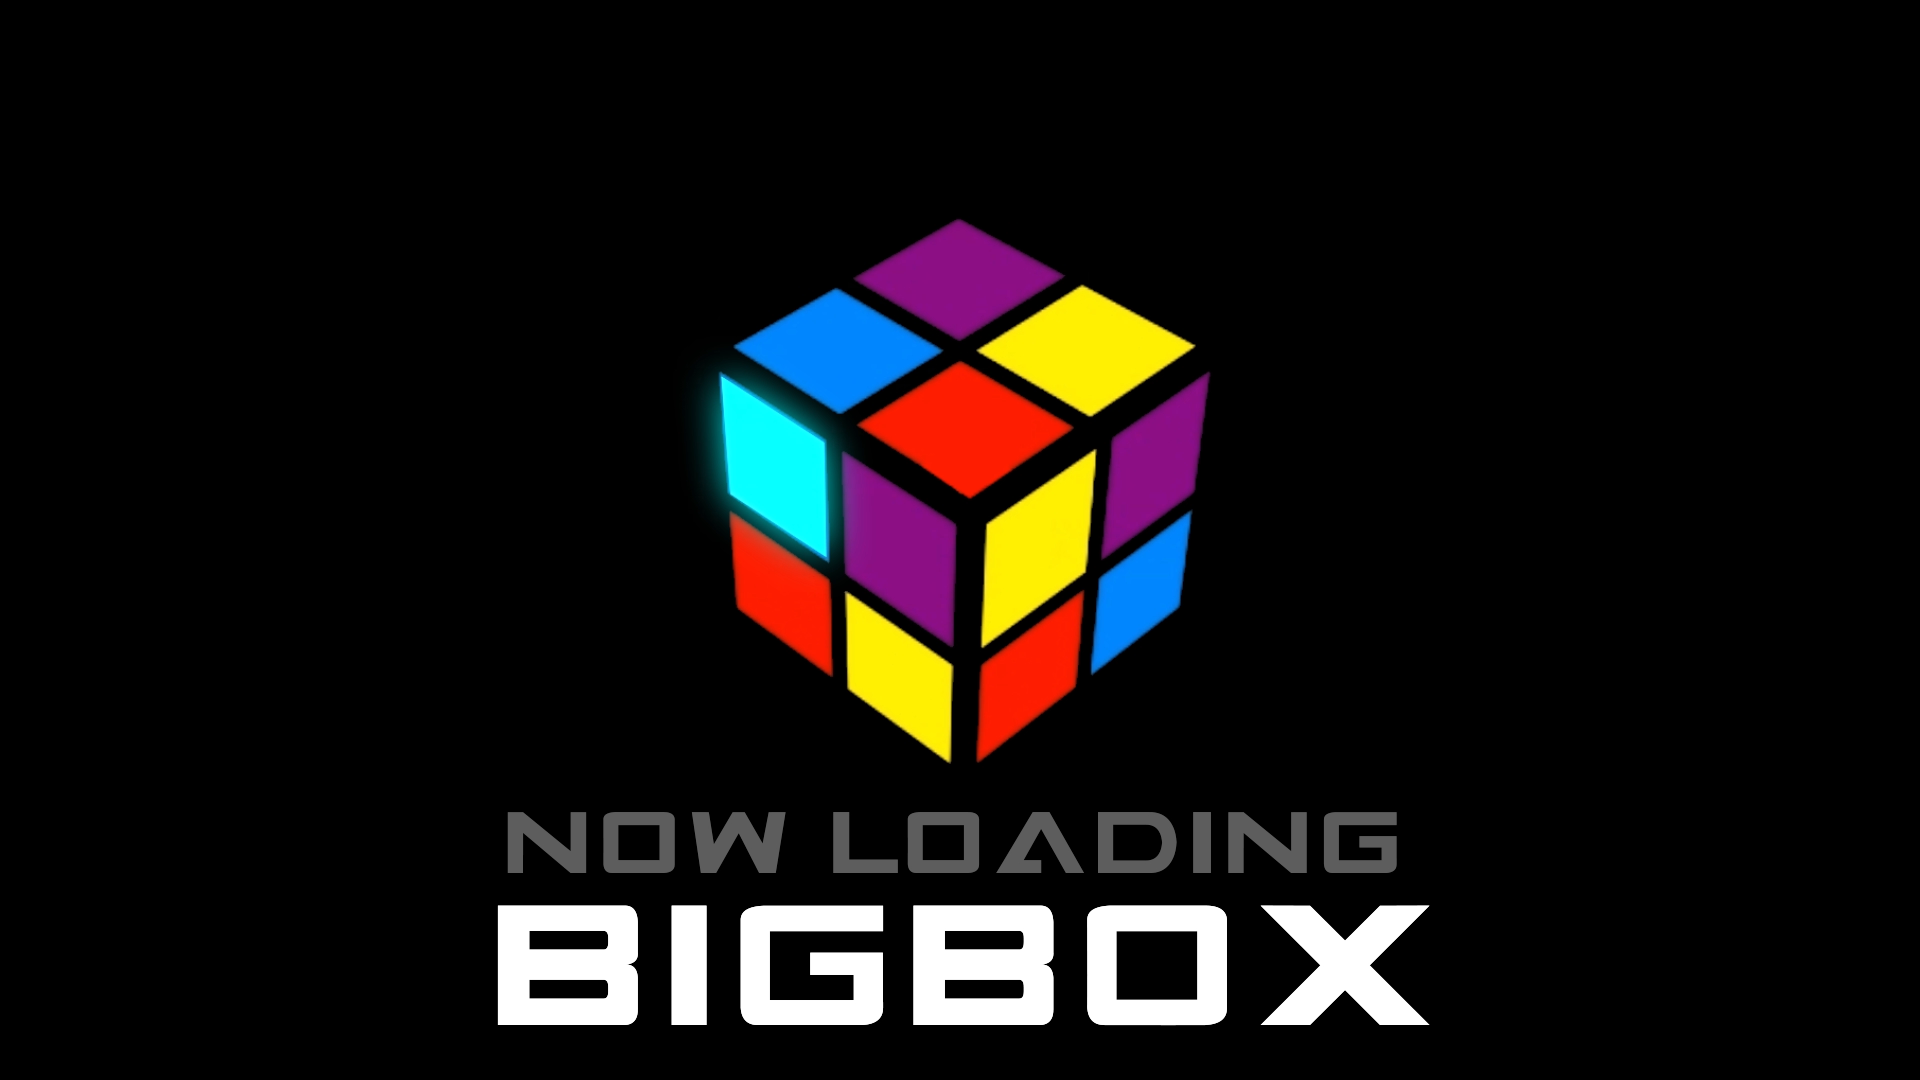 More information about "Gamecube Style Startup Video For Bigbox"